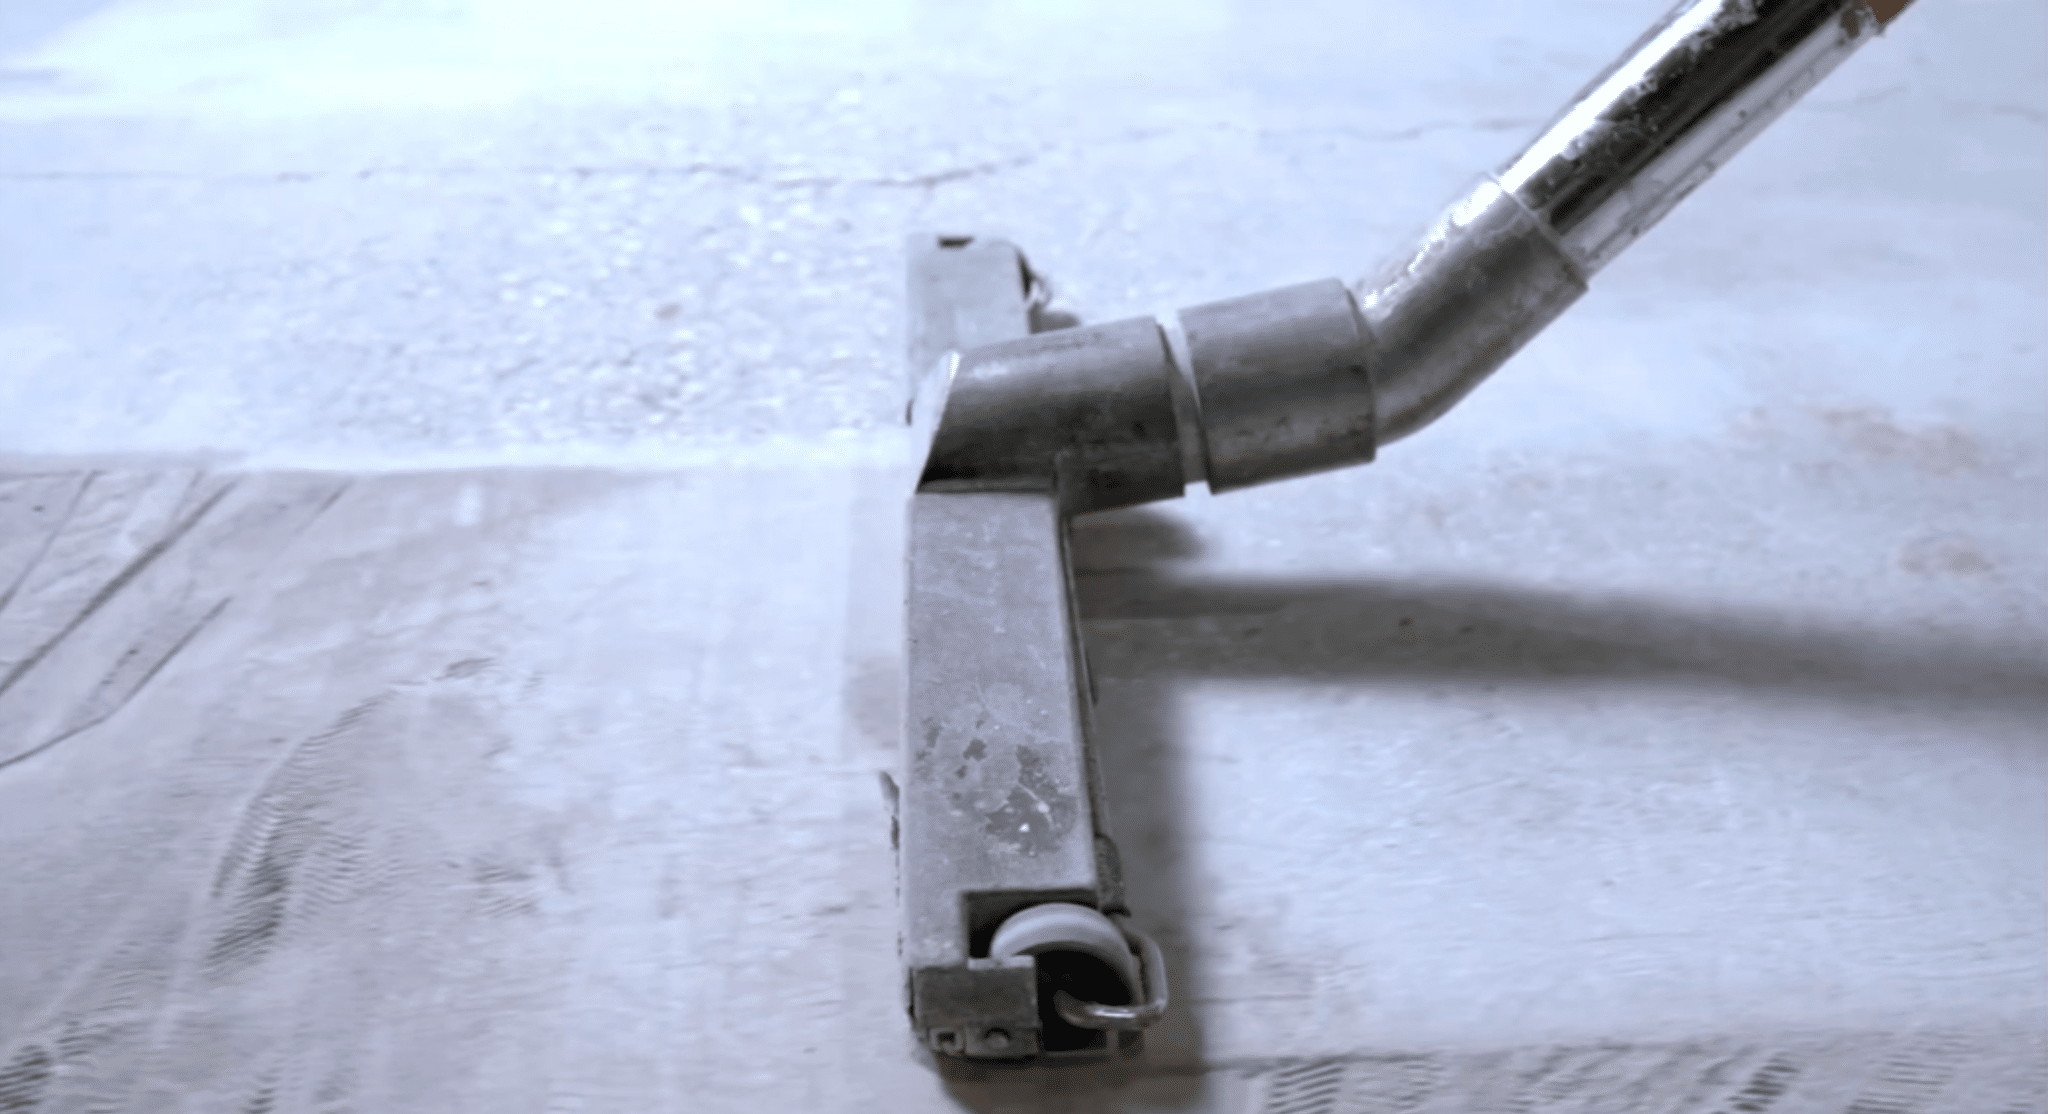 Metal vacuum cleaner nozzle on a textured floor, showing signs of wear and tear, focusing on its angled tube and flat head.